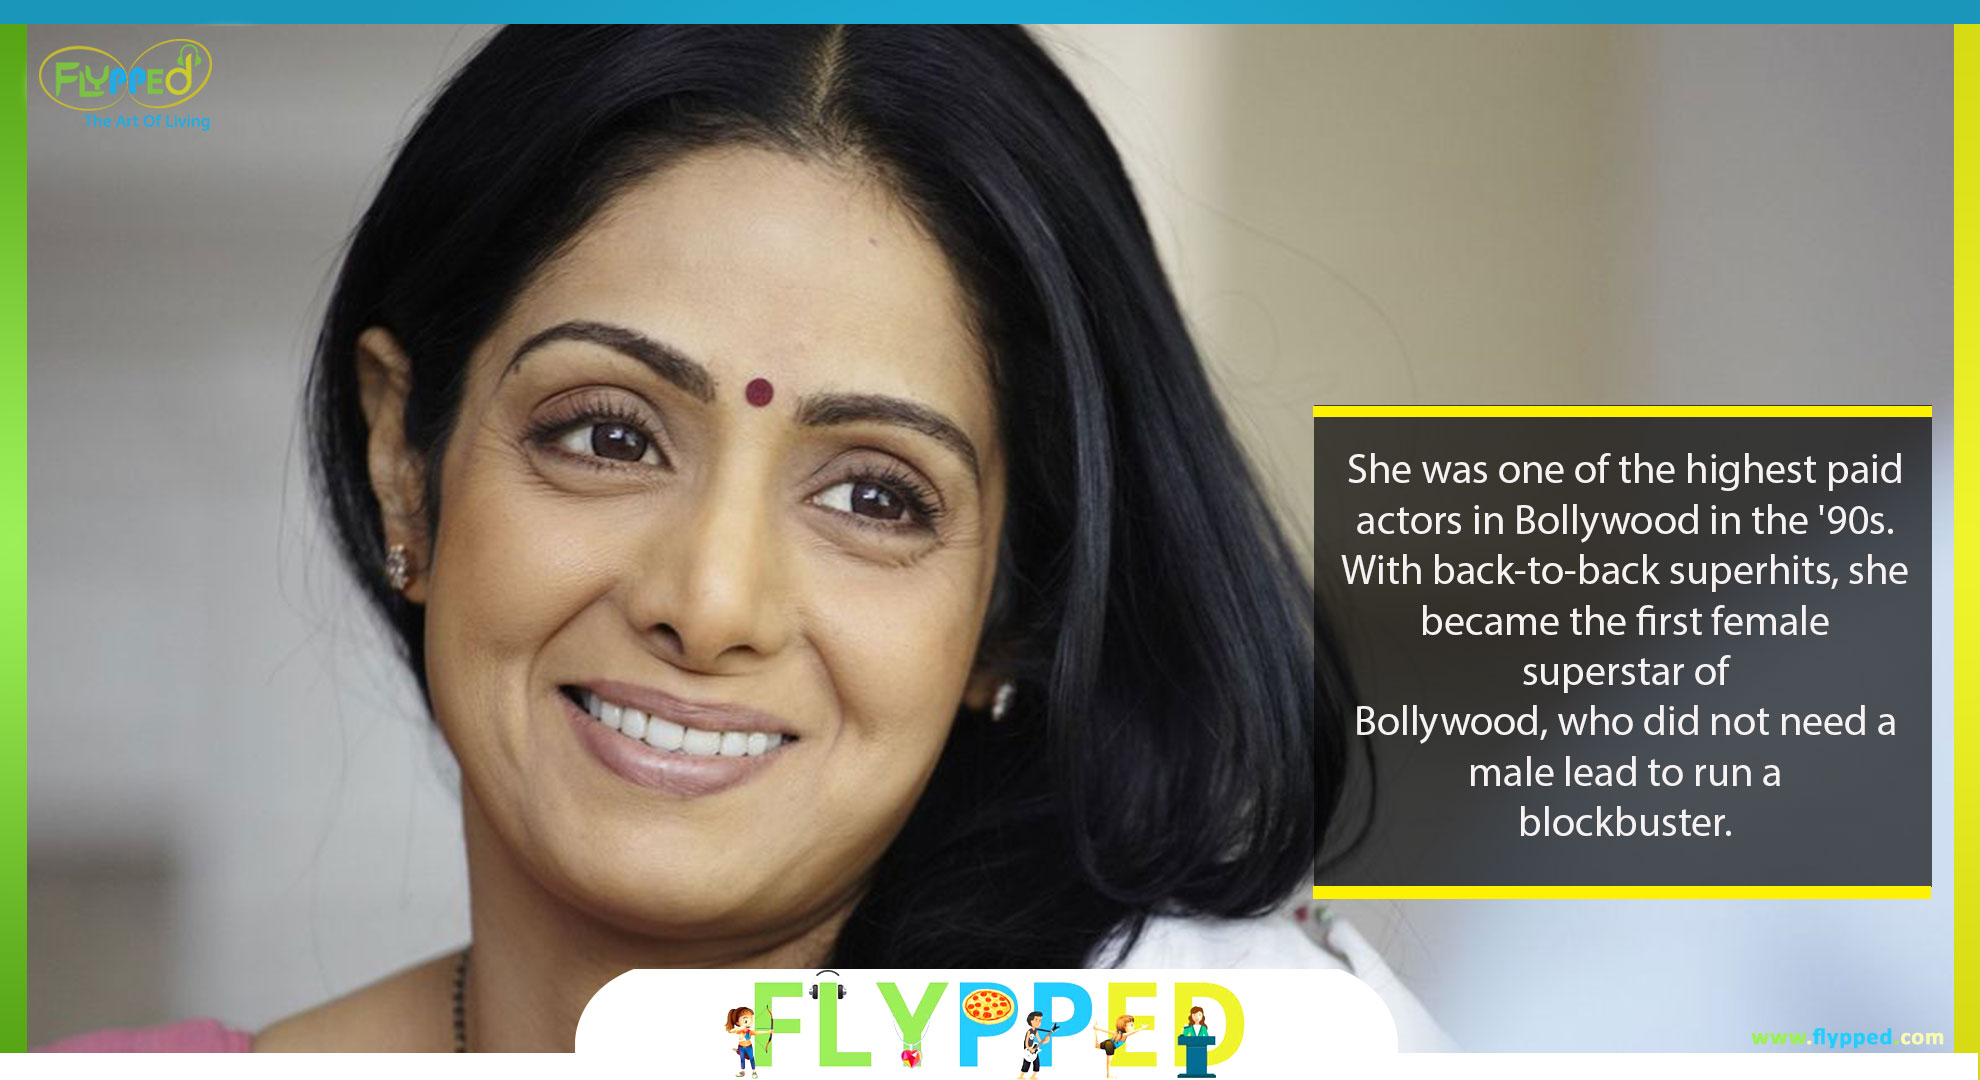 10-Interesting-facts-we-bet-you-didn't-know-about-Sridevi4